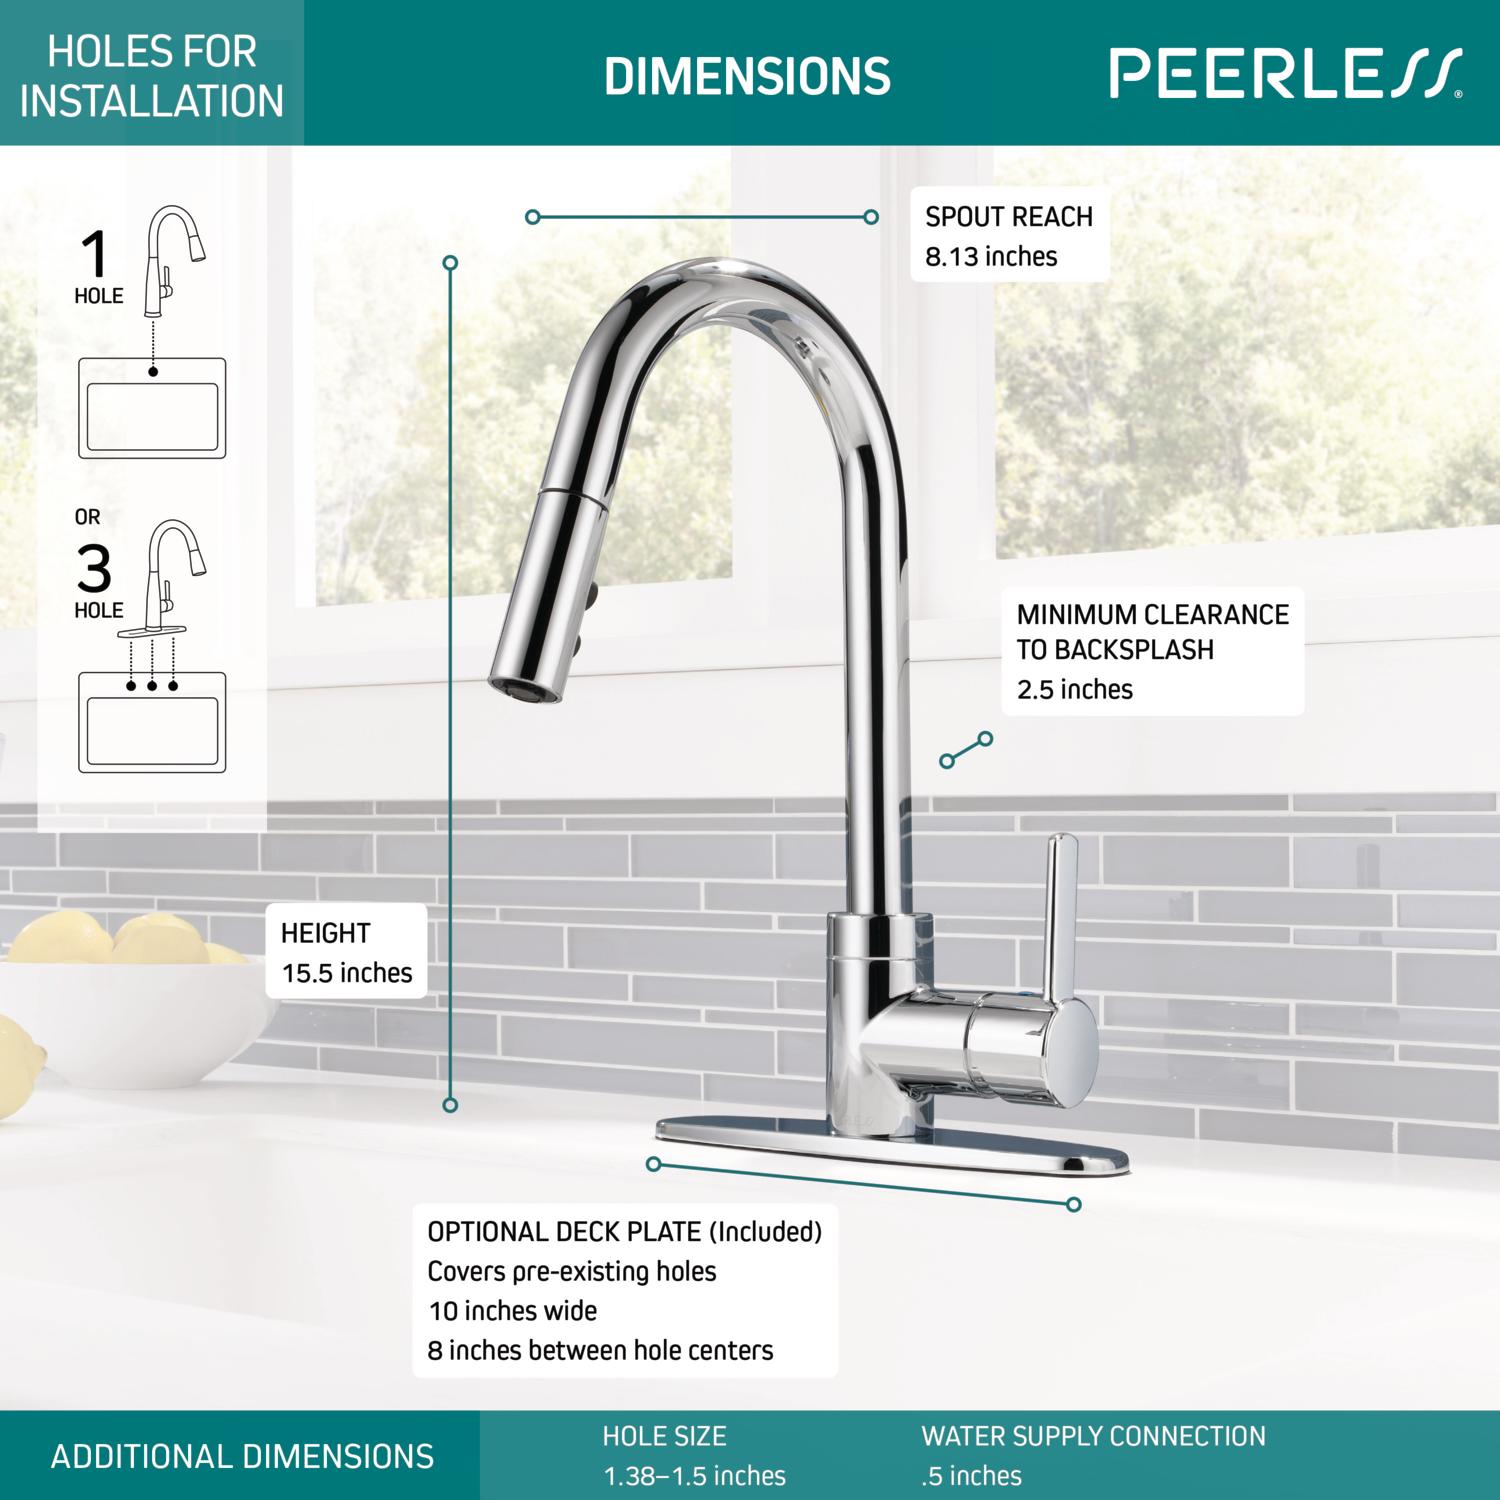 Peerless Precept Single Handle Pull-Down Sprayer Kitchen Faucet in Chrome P188152LF - image 2 of 15